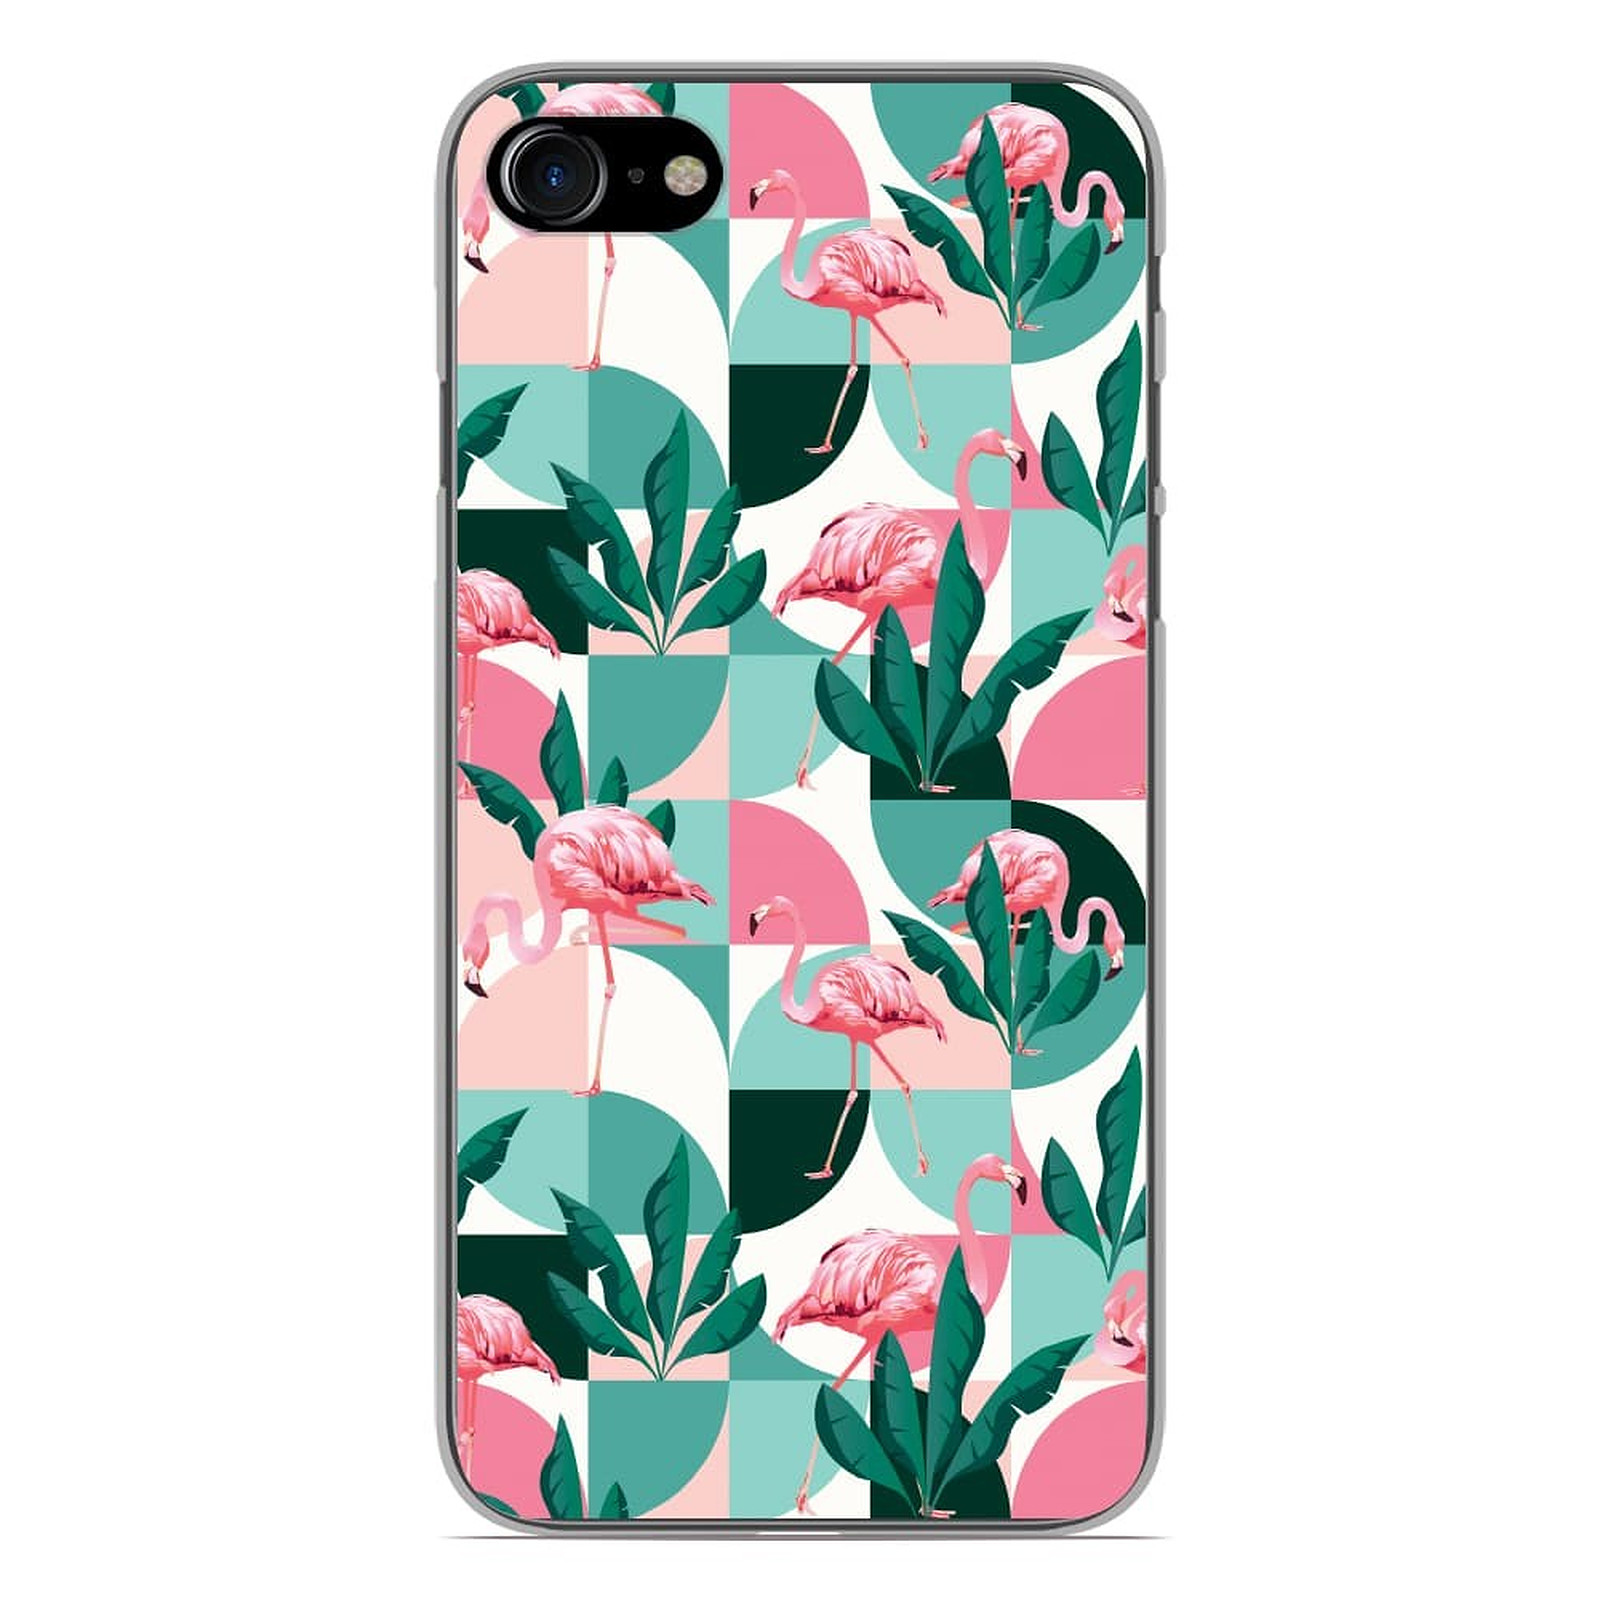 1001 Coques Coque silicone gel Apple iPhone 8 motif Flamants Roses ge´ome´trique - Coque telephone 1001Coques